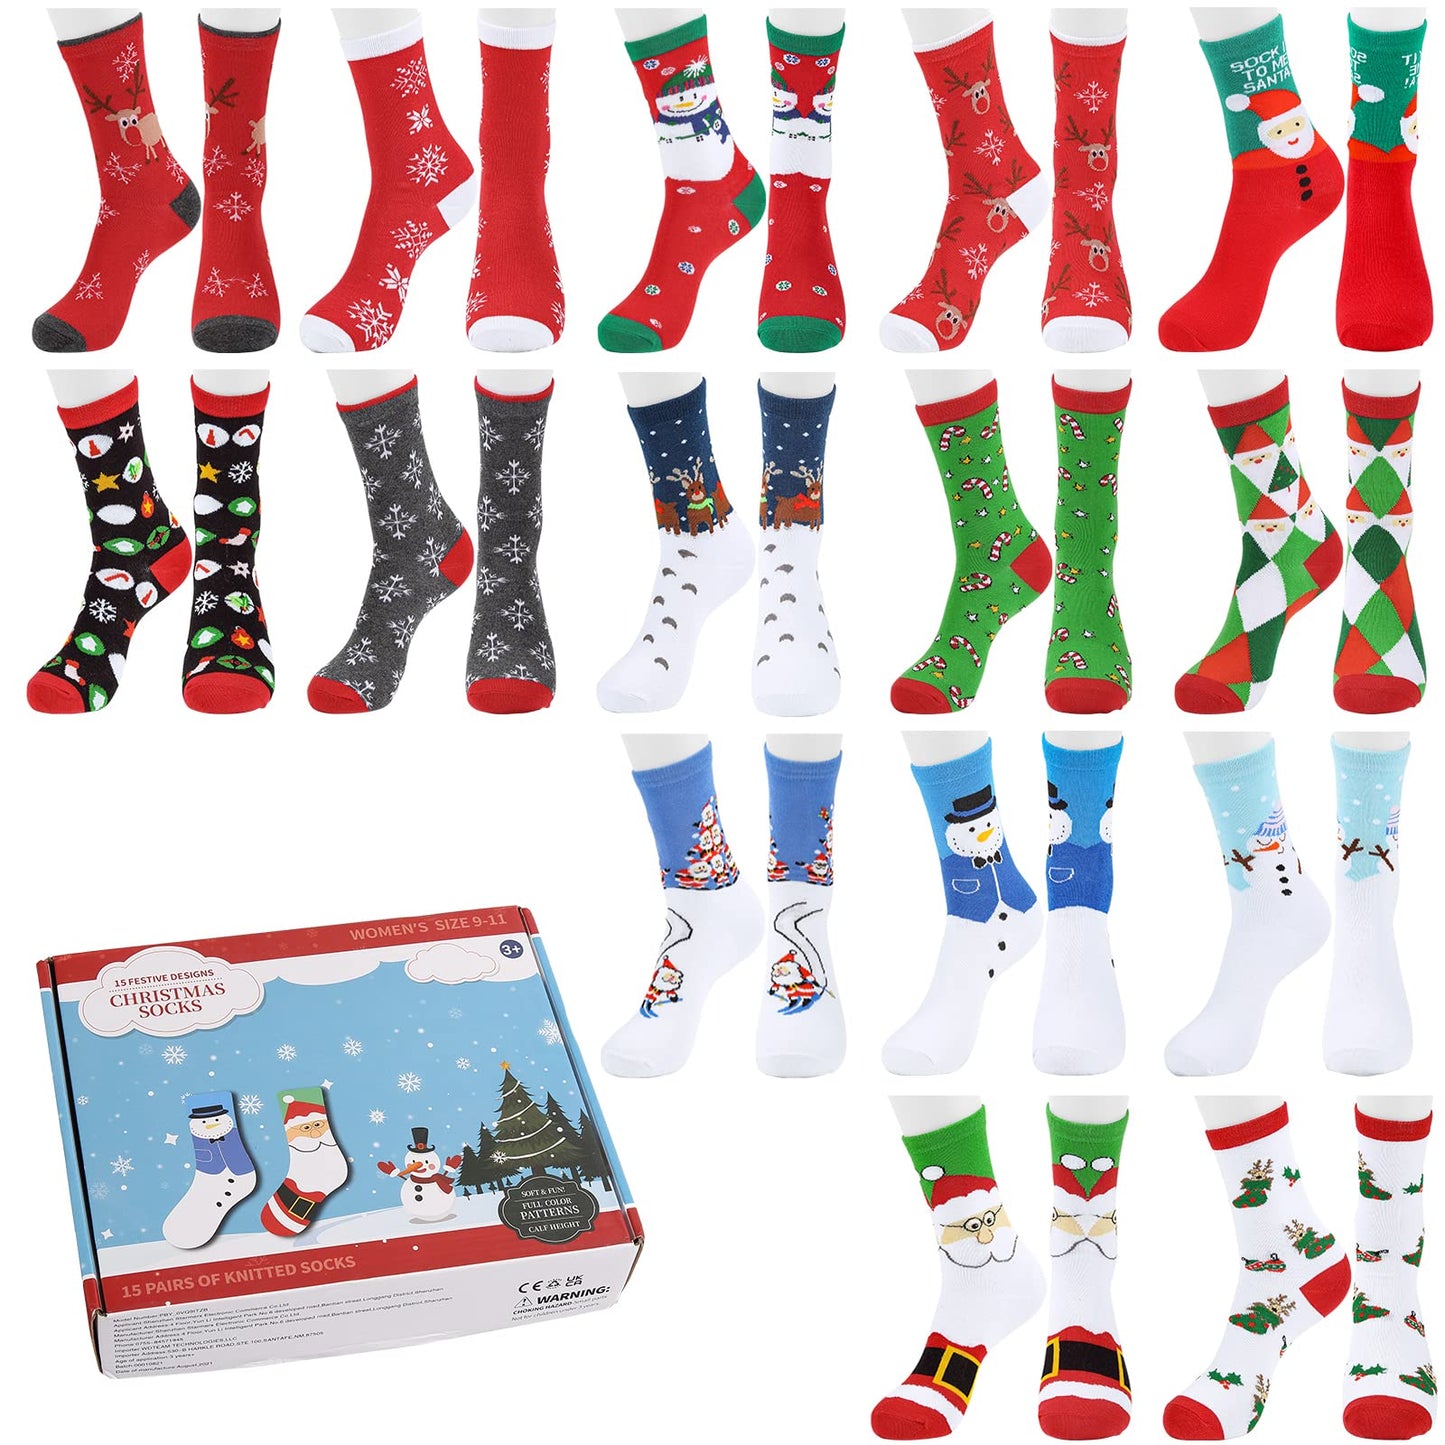 15 Pairs Crew Christmas Holiday Socks拢卢Cozy Funny Cotton Knit Xmas Soft Socks,Colorful Festive Design for Man Woman Girls Winter Novelty Christmas Gifts with Gift Box